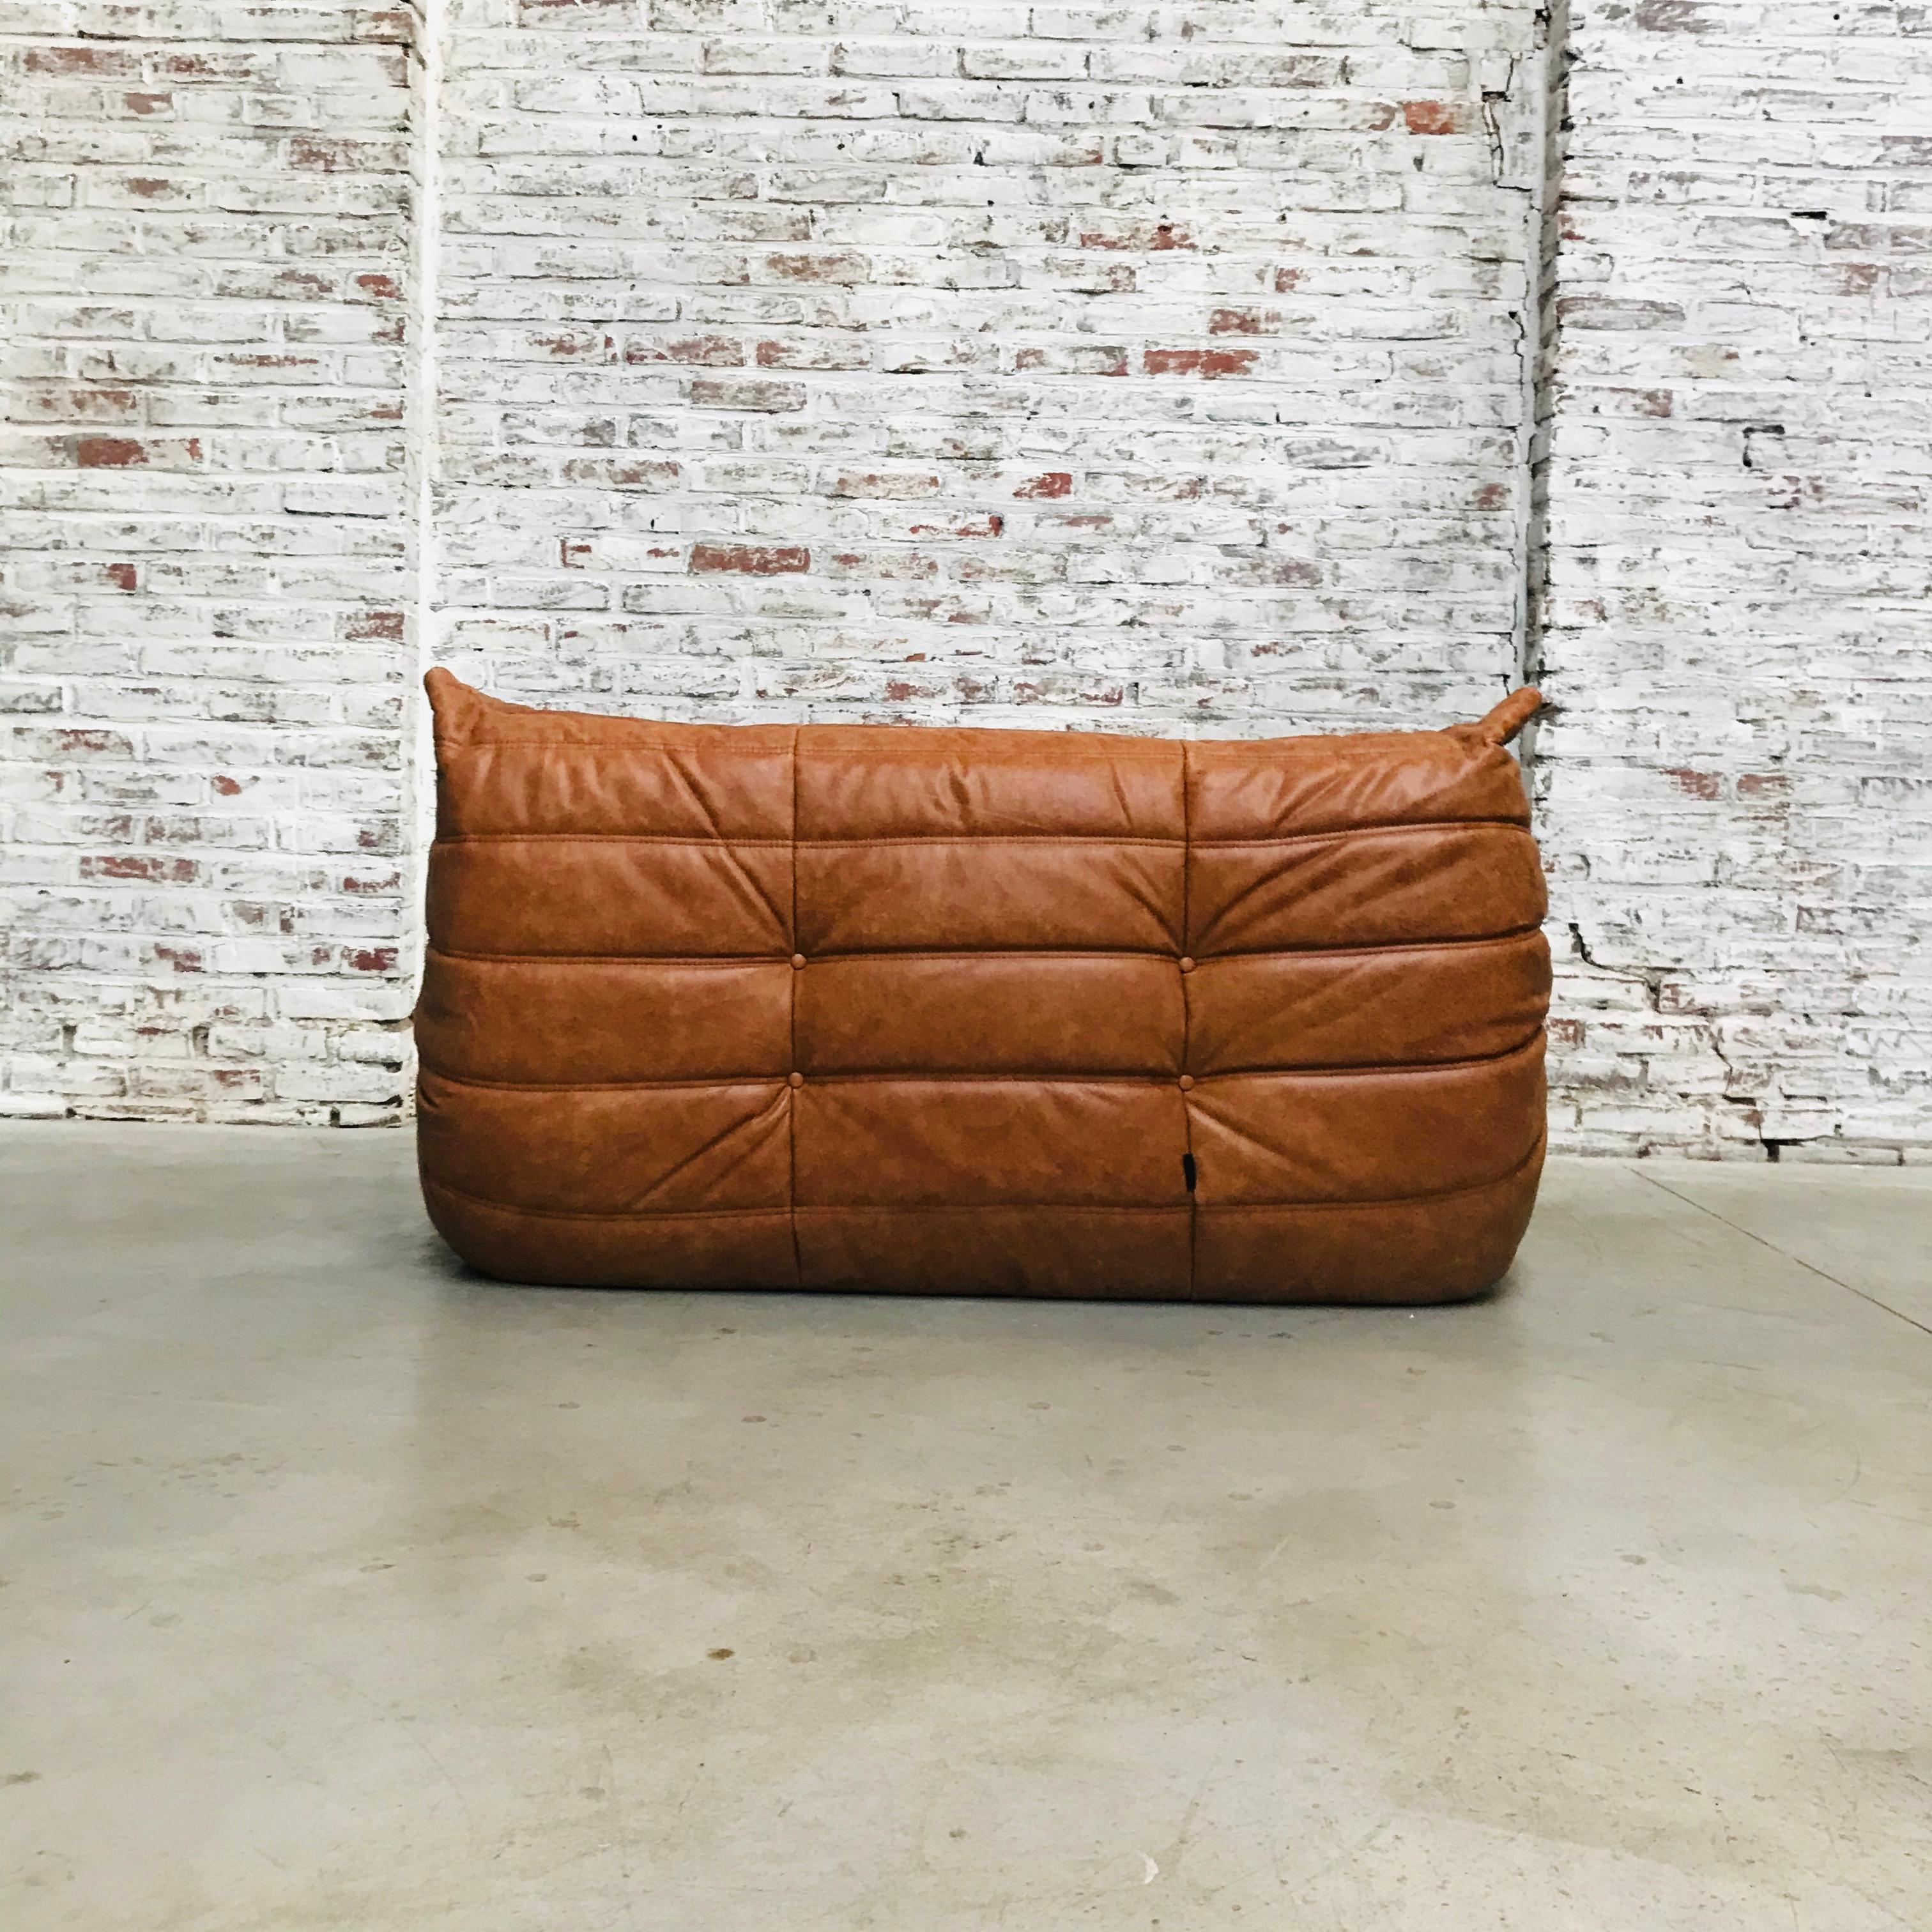 Mid-Century Modern Vintage French Loveseat in Cognac Leather by Michel Ducaroy for Ligne Roset